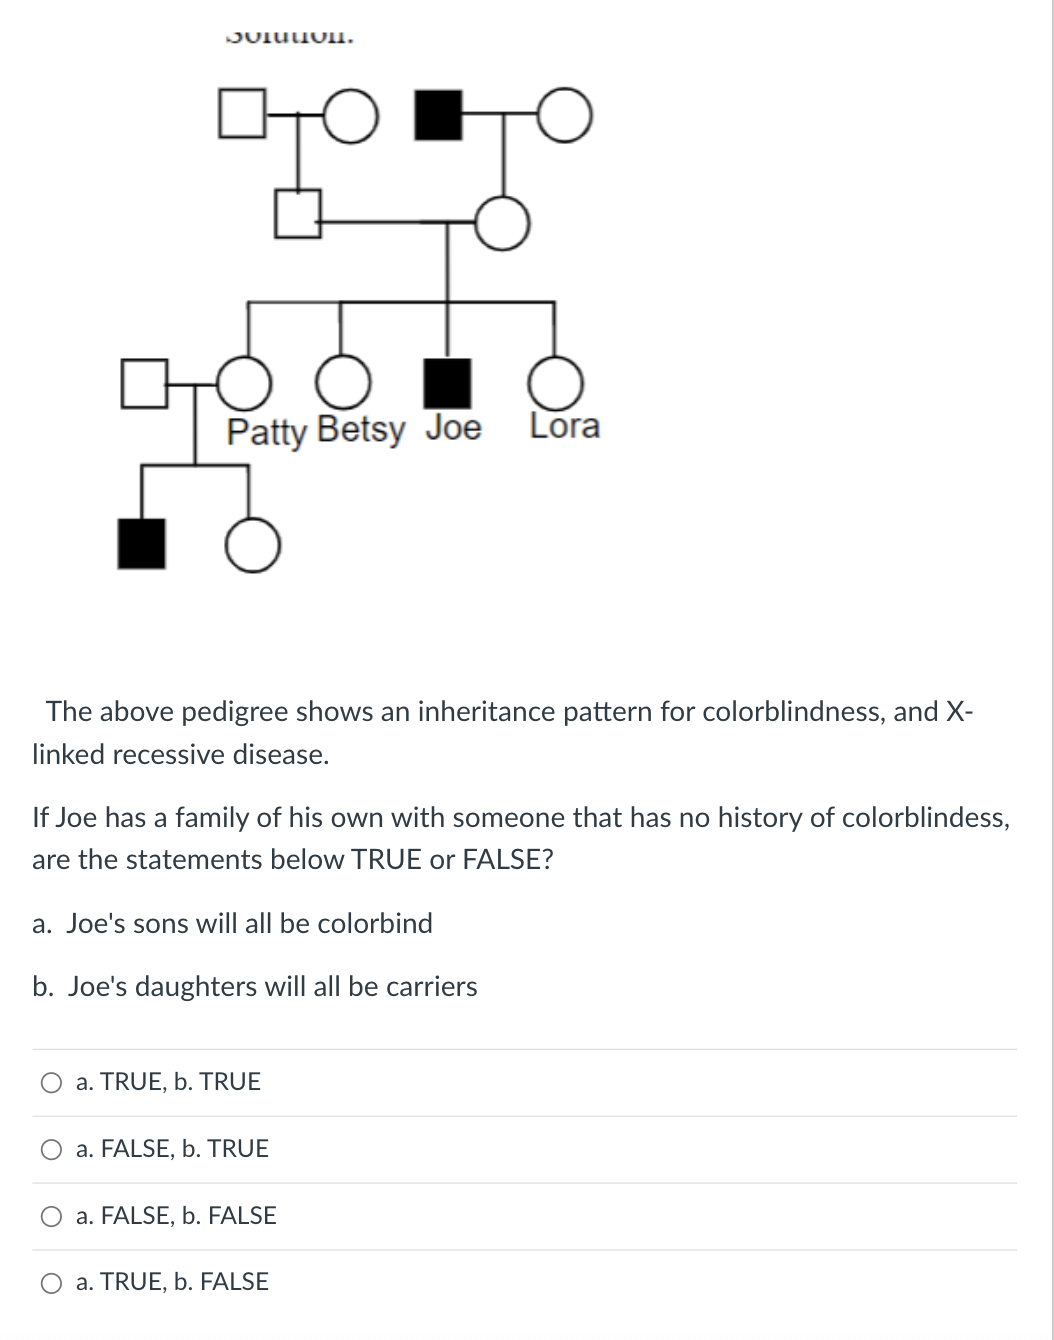 Solution.
Patty Betsy Joe Lora
The above pedigree shows an inheritance pattern for colorblindness, and X-
linked recessive disease.
If Joe has a family of his own with someone that has no history of colorblindess,
are the statements below TRUE or FALSE?
a. Joe's sons will all be colorbind
b. Joe's daughters will all be carriers
a. TRUE, b. TRUE
O a. FALSE, b. TRUE
a. FALSE, b. FALSE
O a. TRUE, b. FALSE